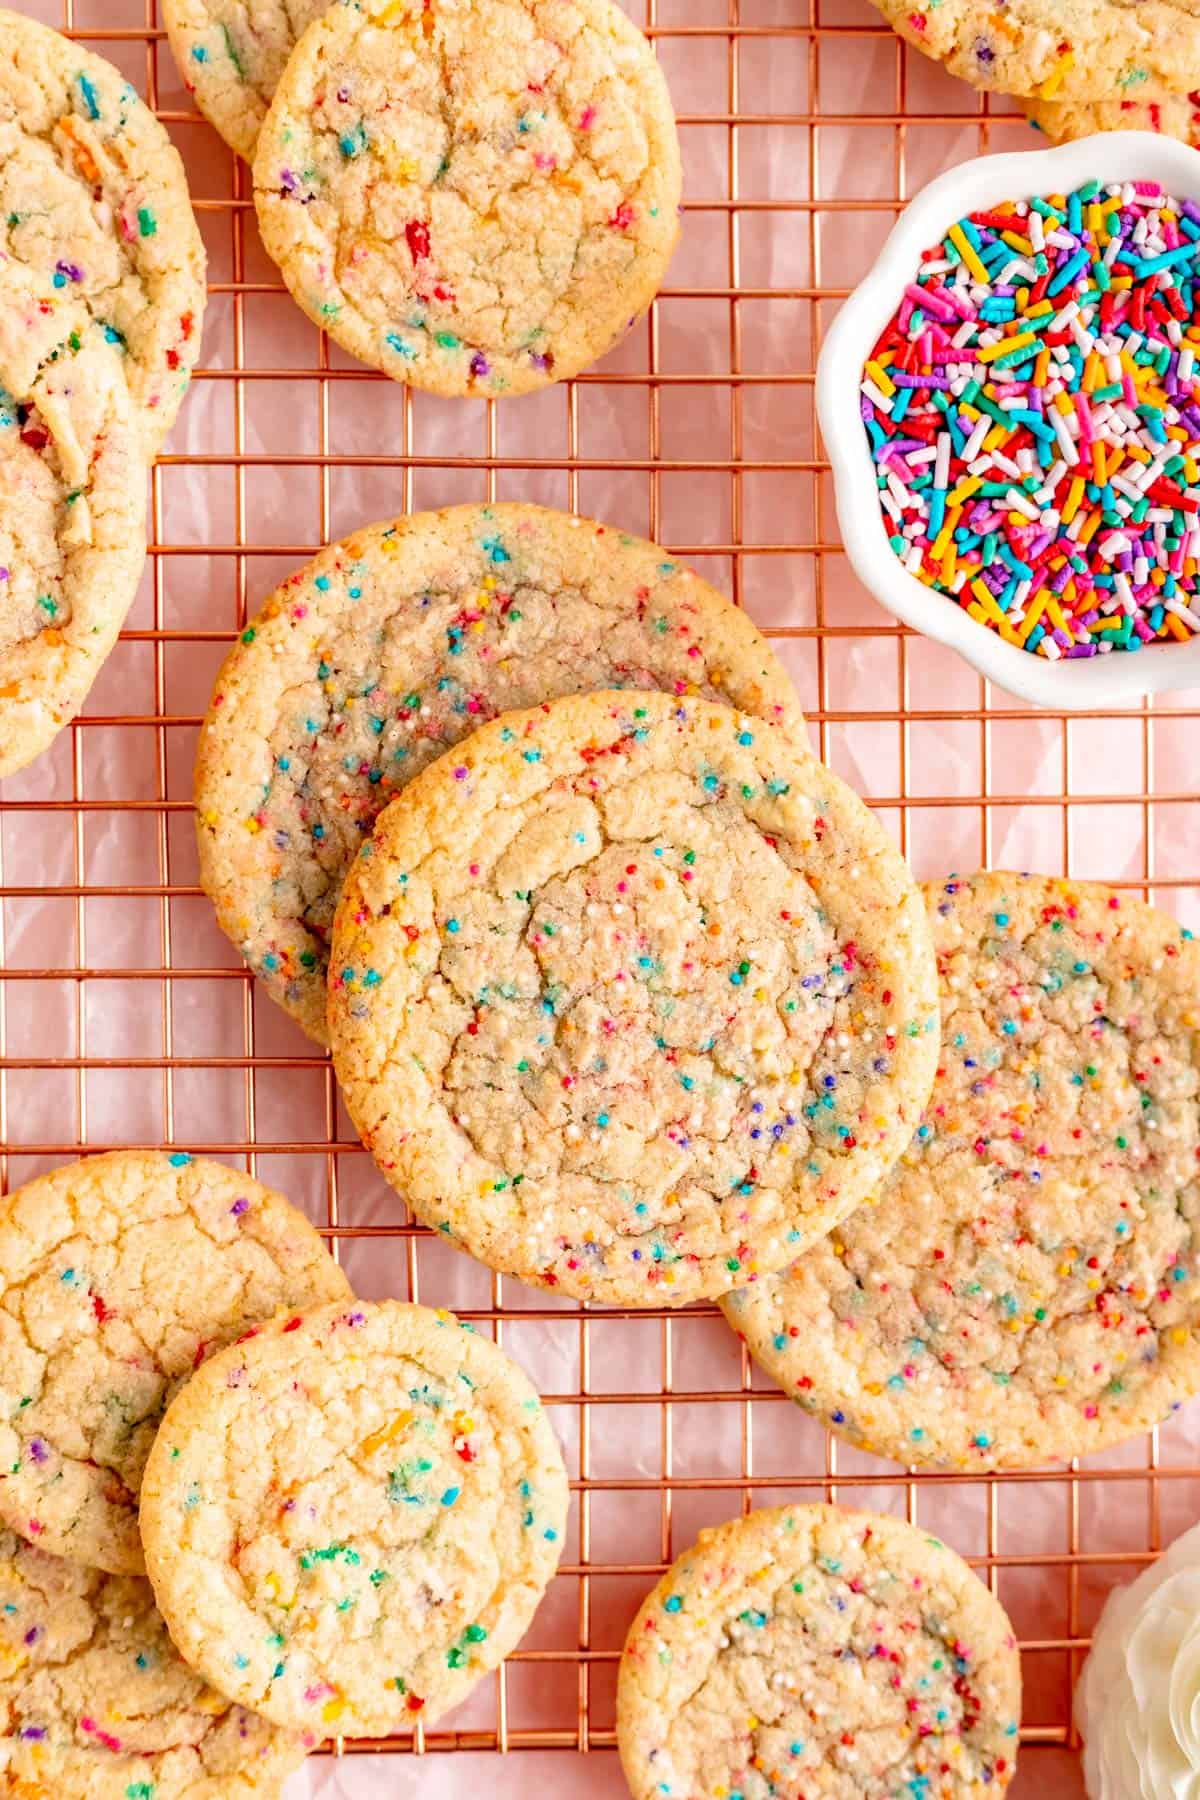 big and little cookies with round and stick sprinkles scattered on copper wire rack.